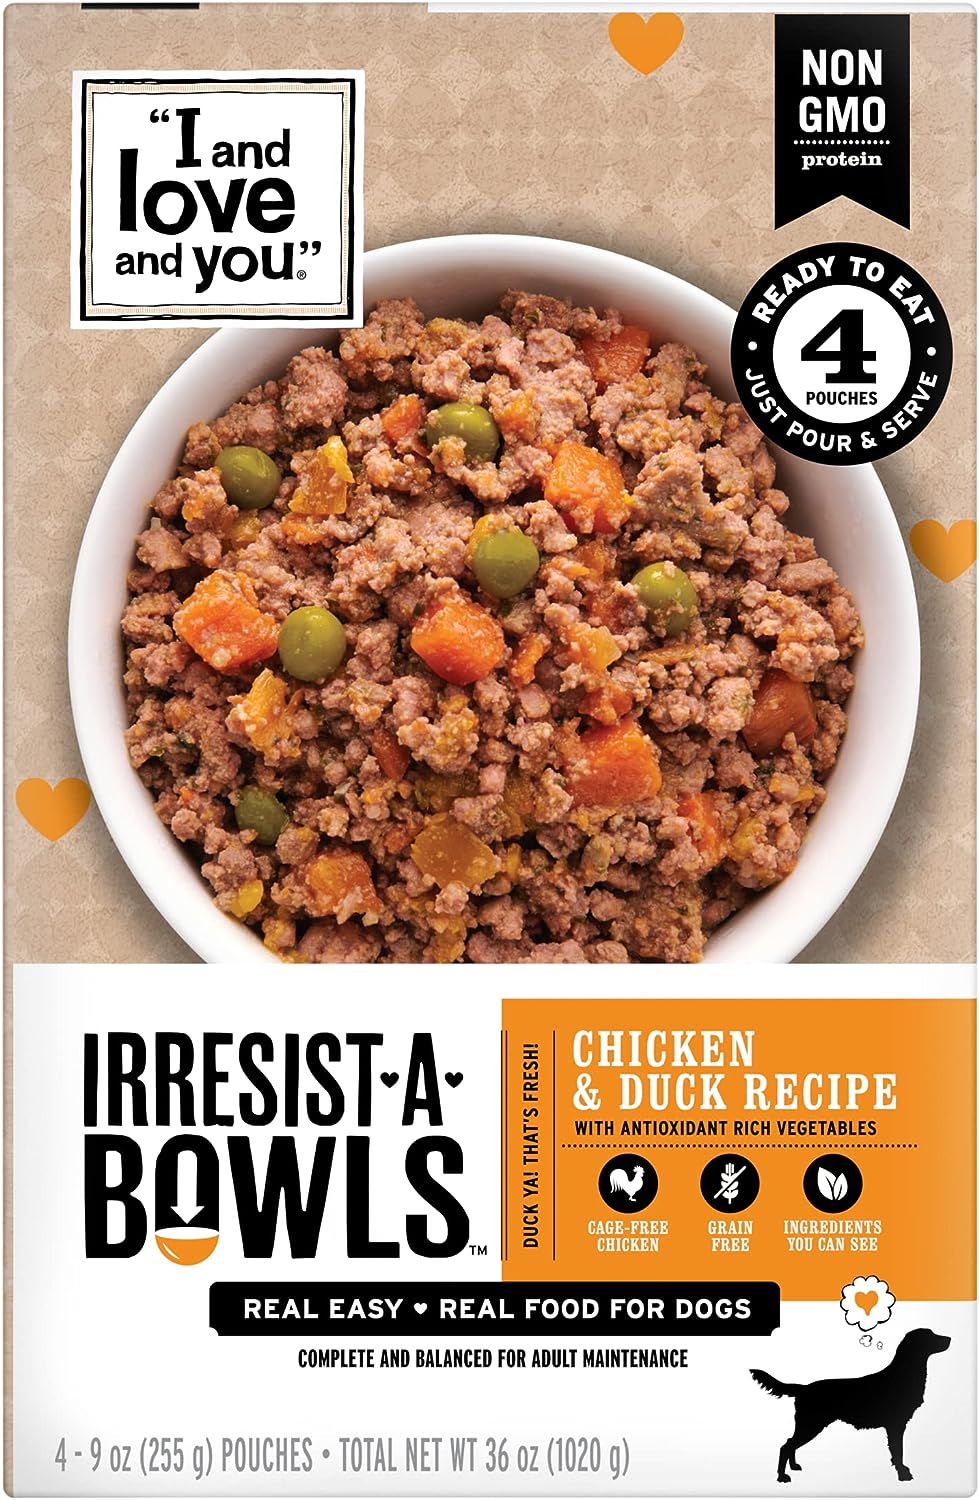 I AND LOVE AND YOU" Irresist-A-Bowls Wet Dog Food, Chicken and Duck Recipe, Ready to Serve, Grain Free, Real Meat, No Fi